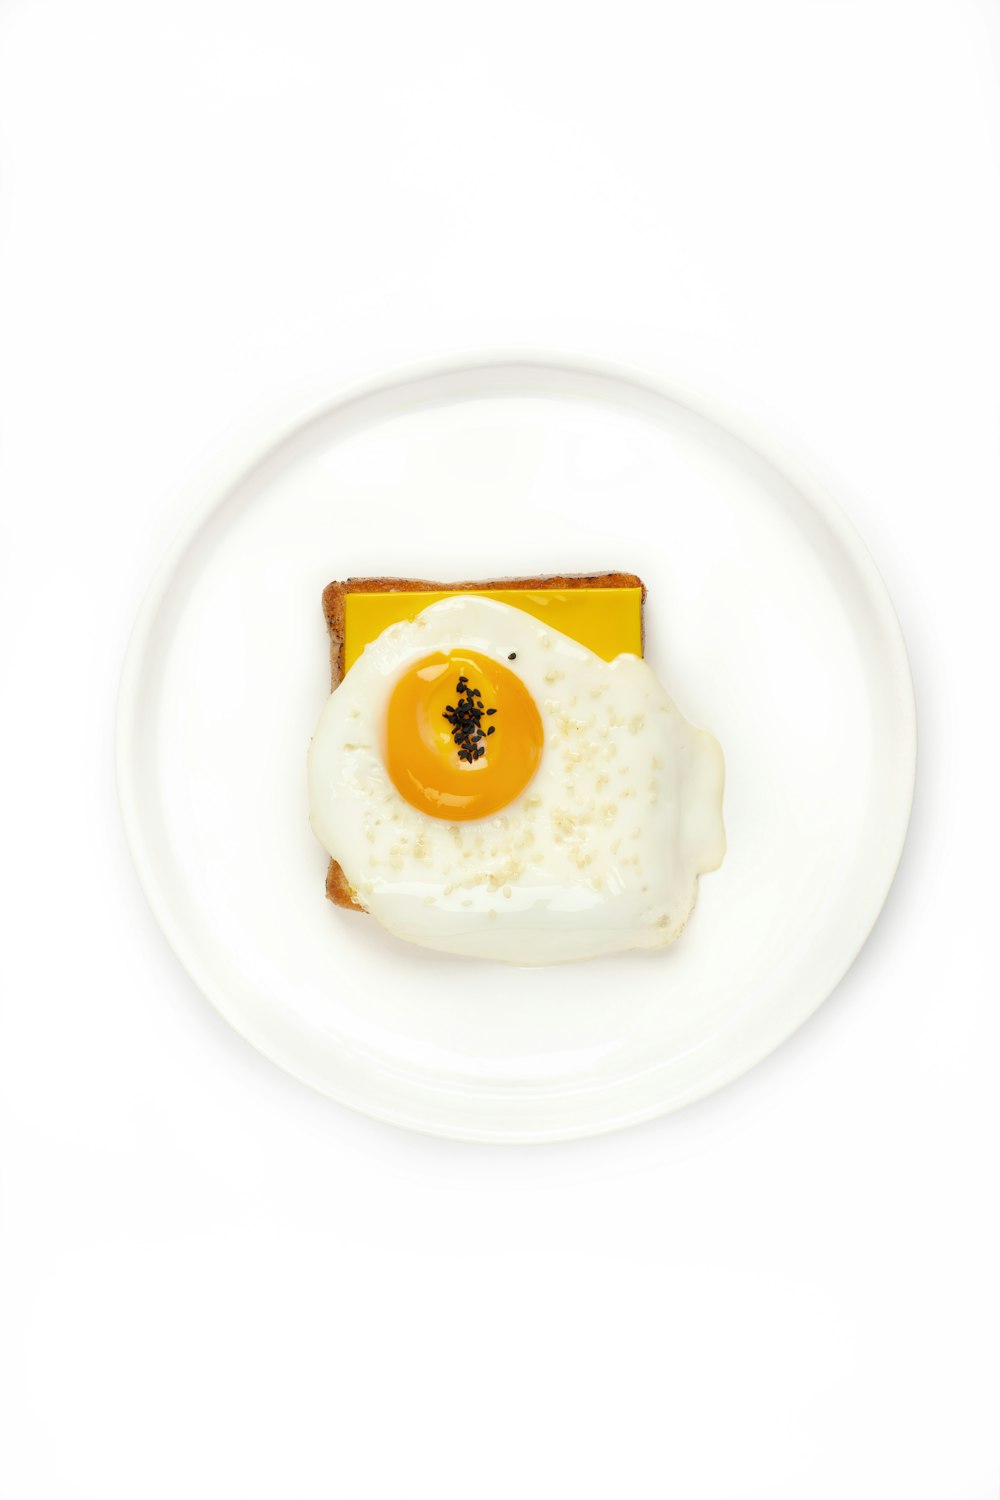 white and yellow egg on white ceramic plate